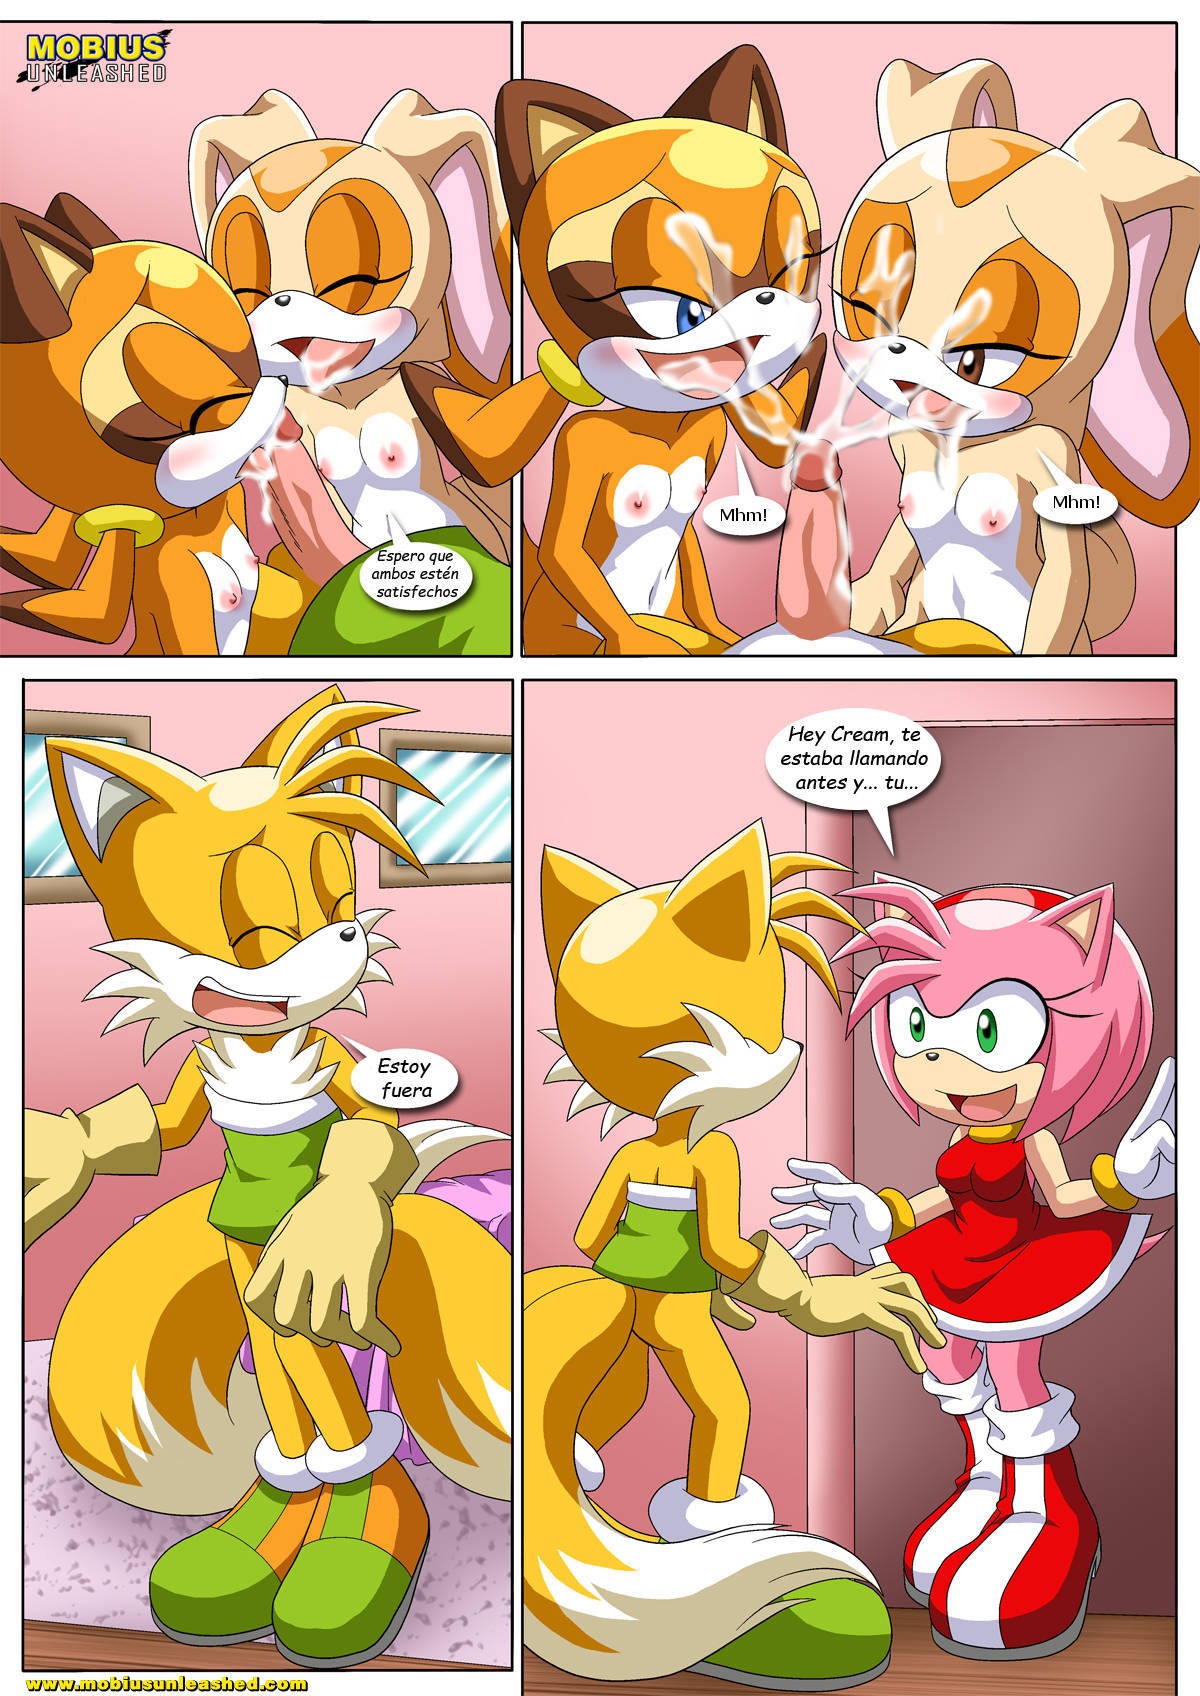 Tails and Cream - 13